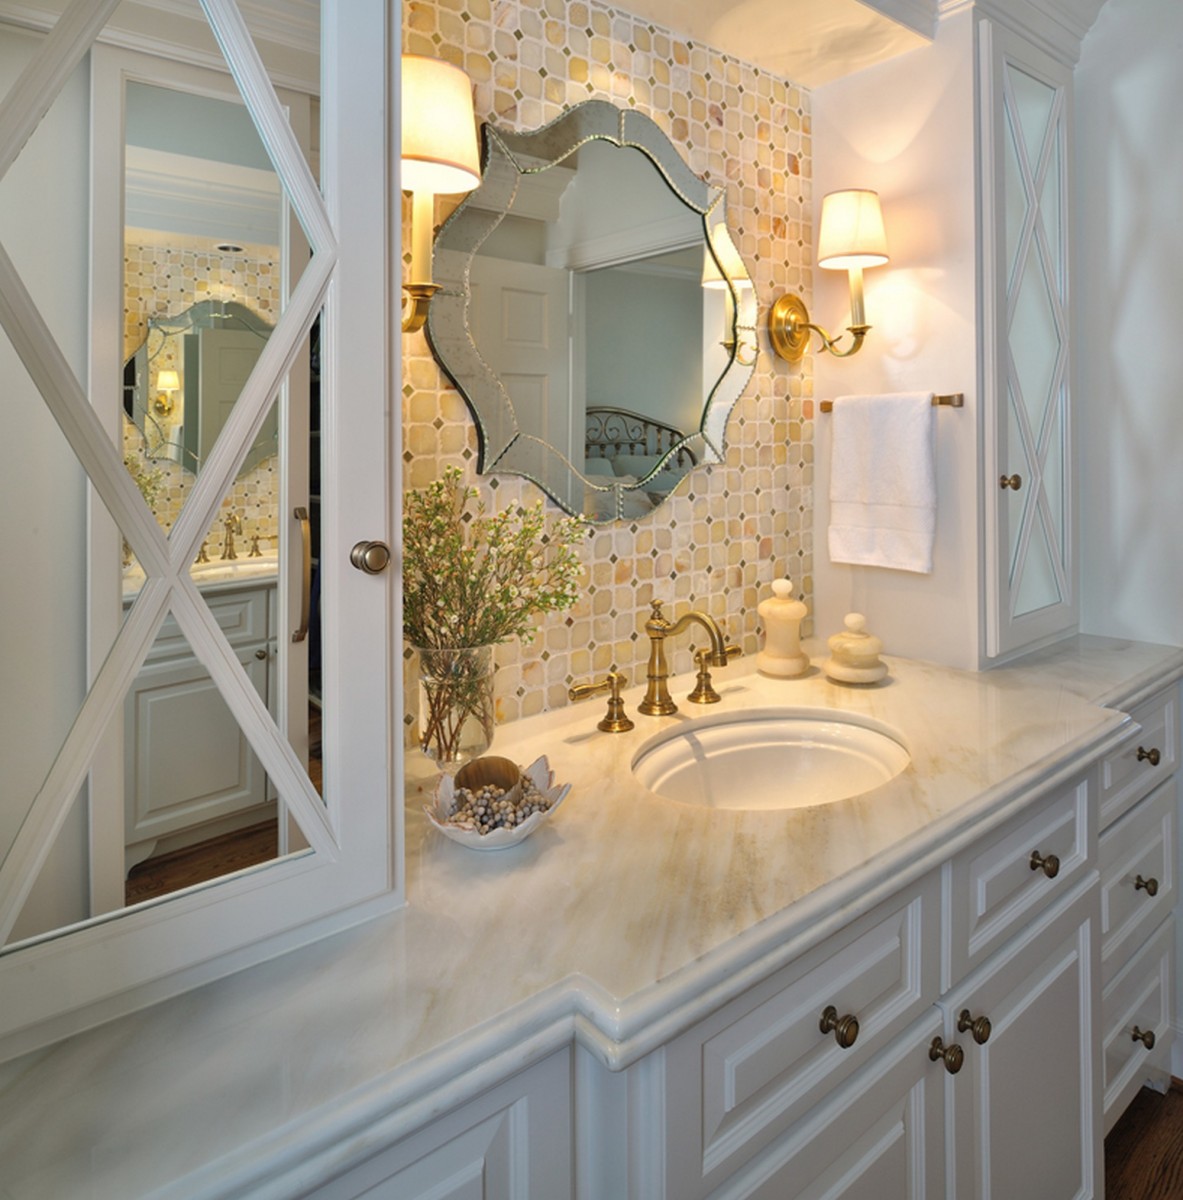 A bathroom with unique mirrors and white cabinets.